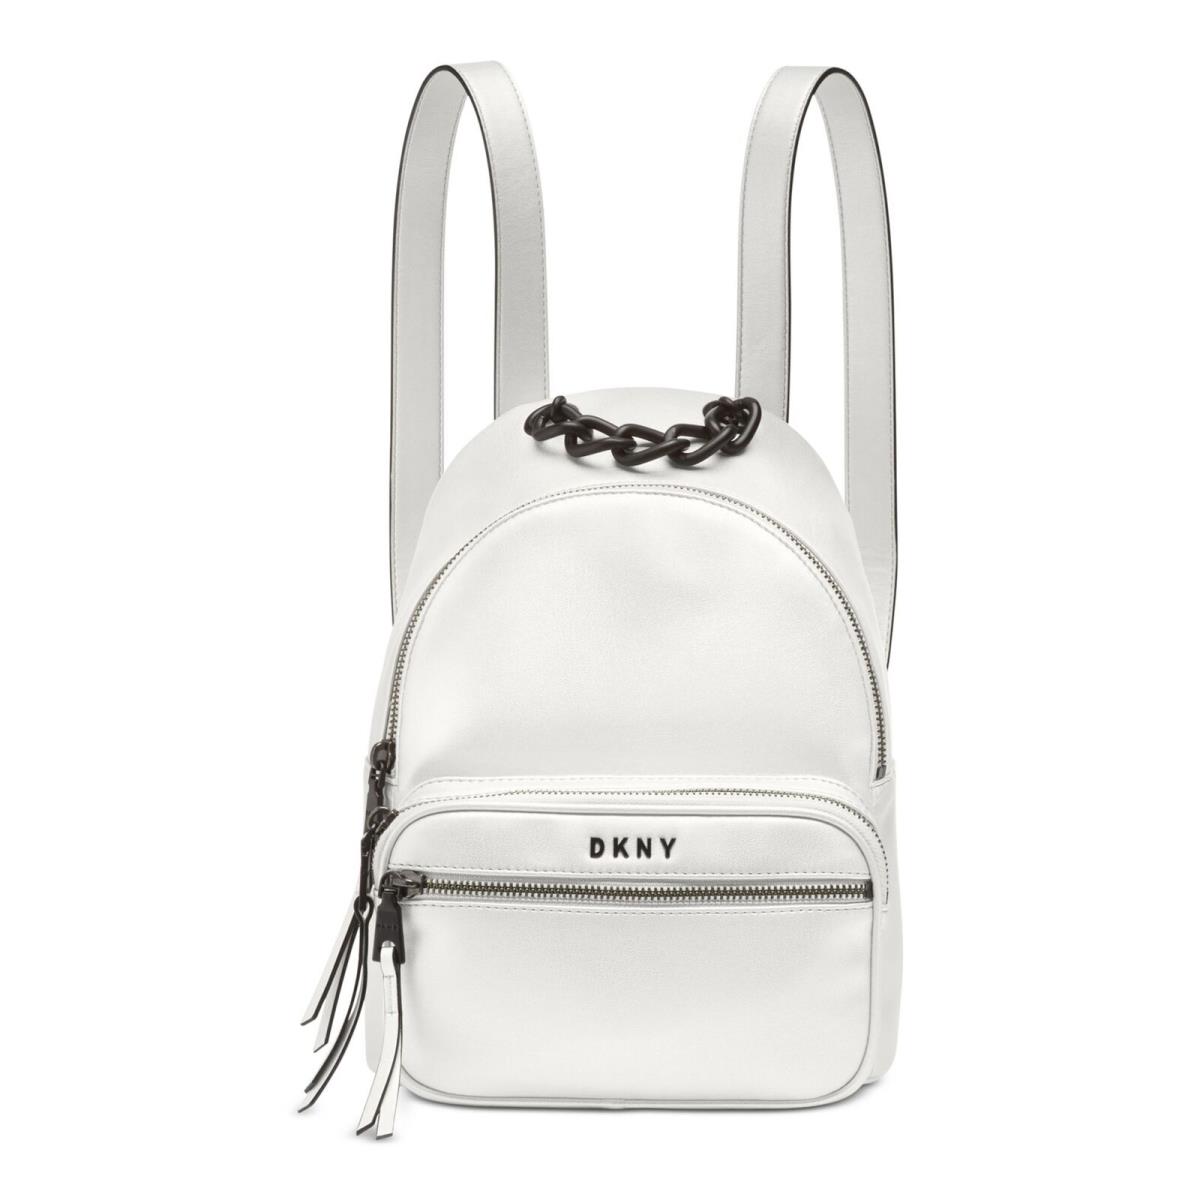 Dkny Women`s White Leather Adjustable Strap Backpack